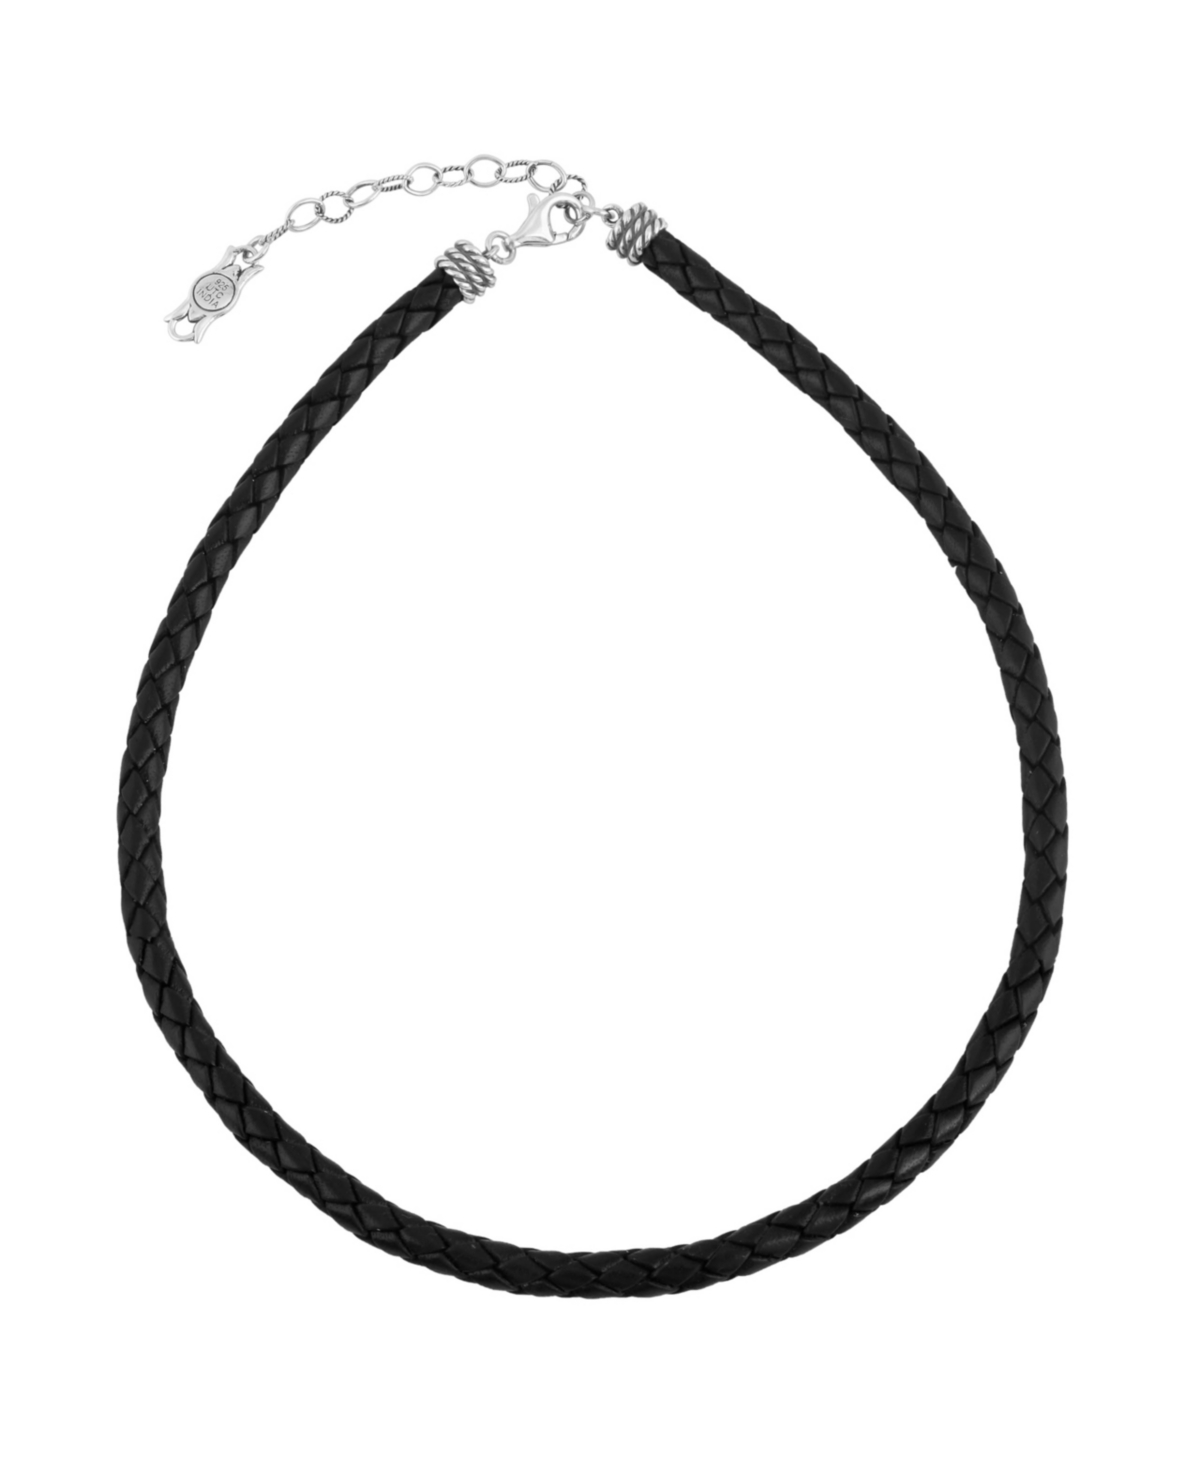 Braided Genuine Leather and Sterling Silver Necklace, 17-20 Inch Length - Silver/black leather